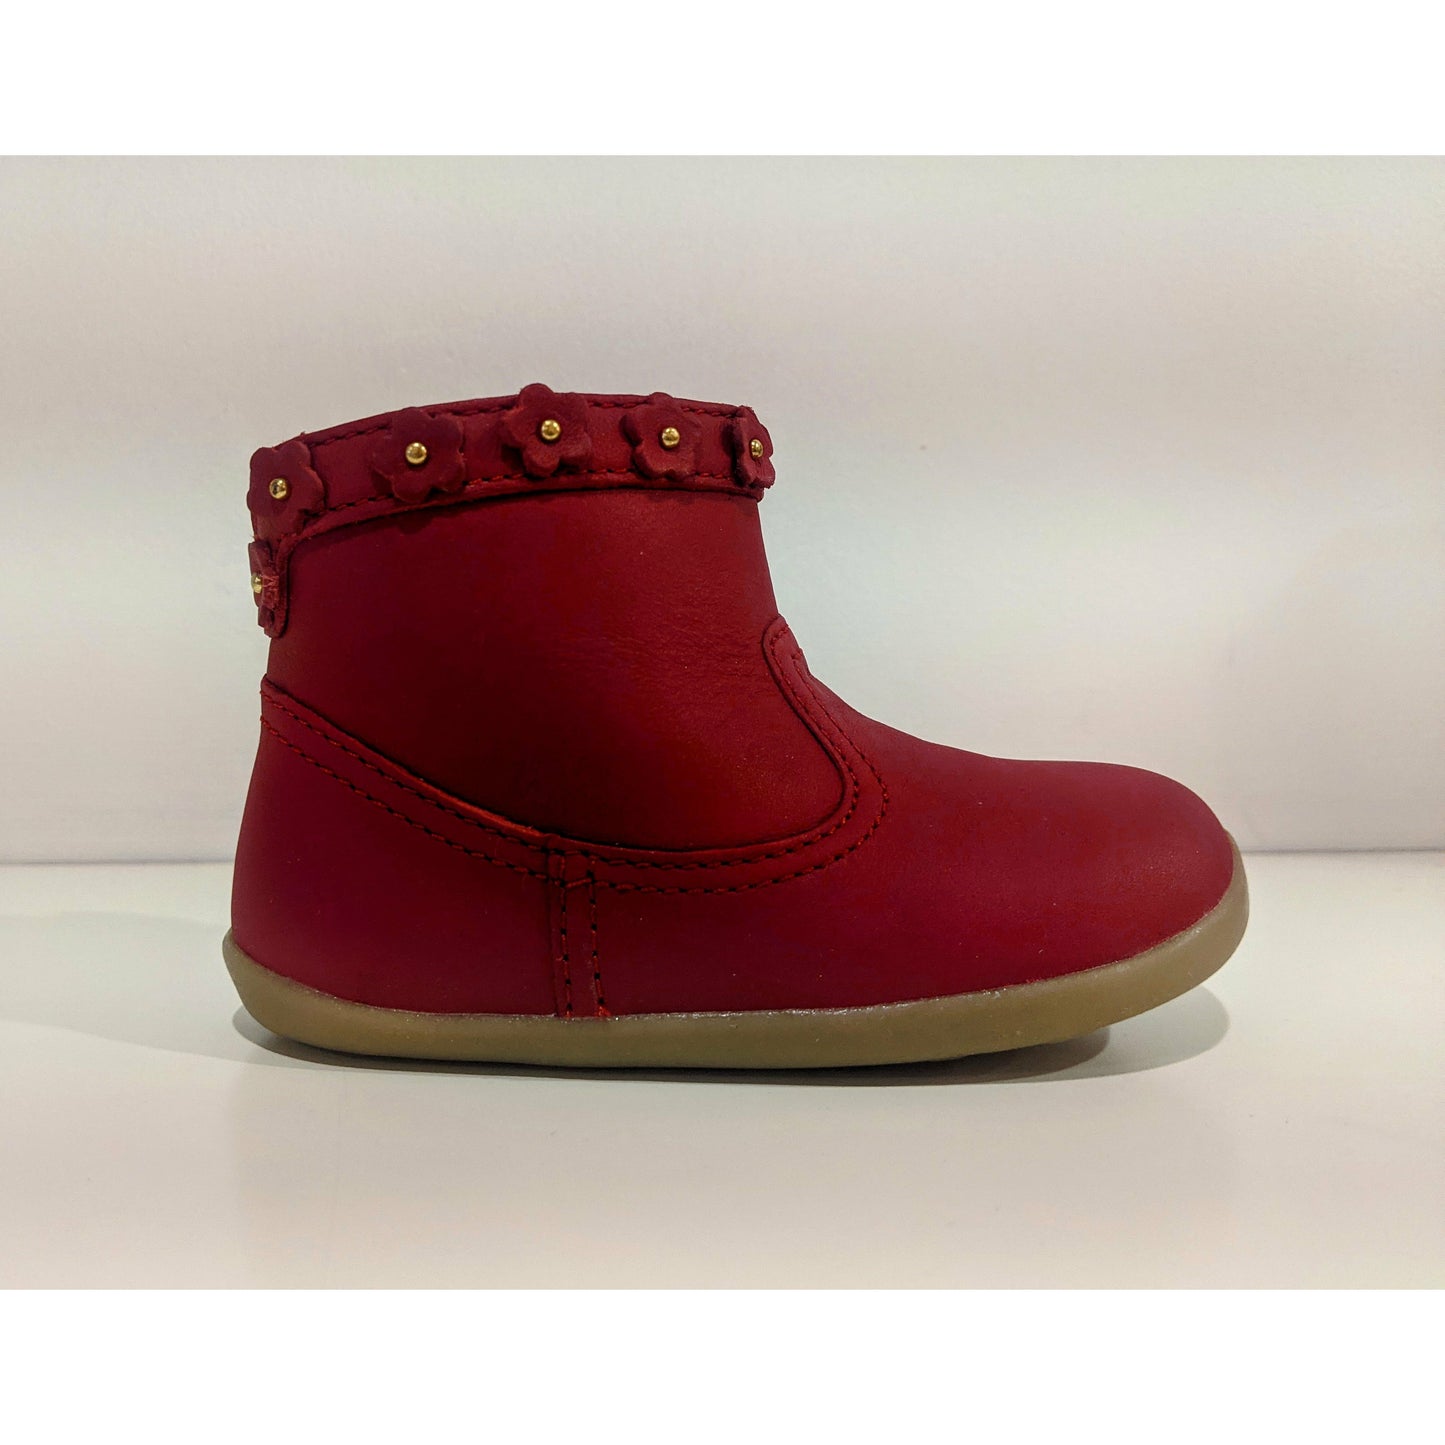 A girls ankle boot by Bobux, style Escape, in red with red and gold flowers. Right side view.